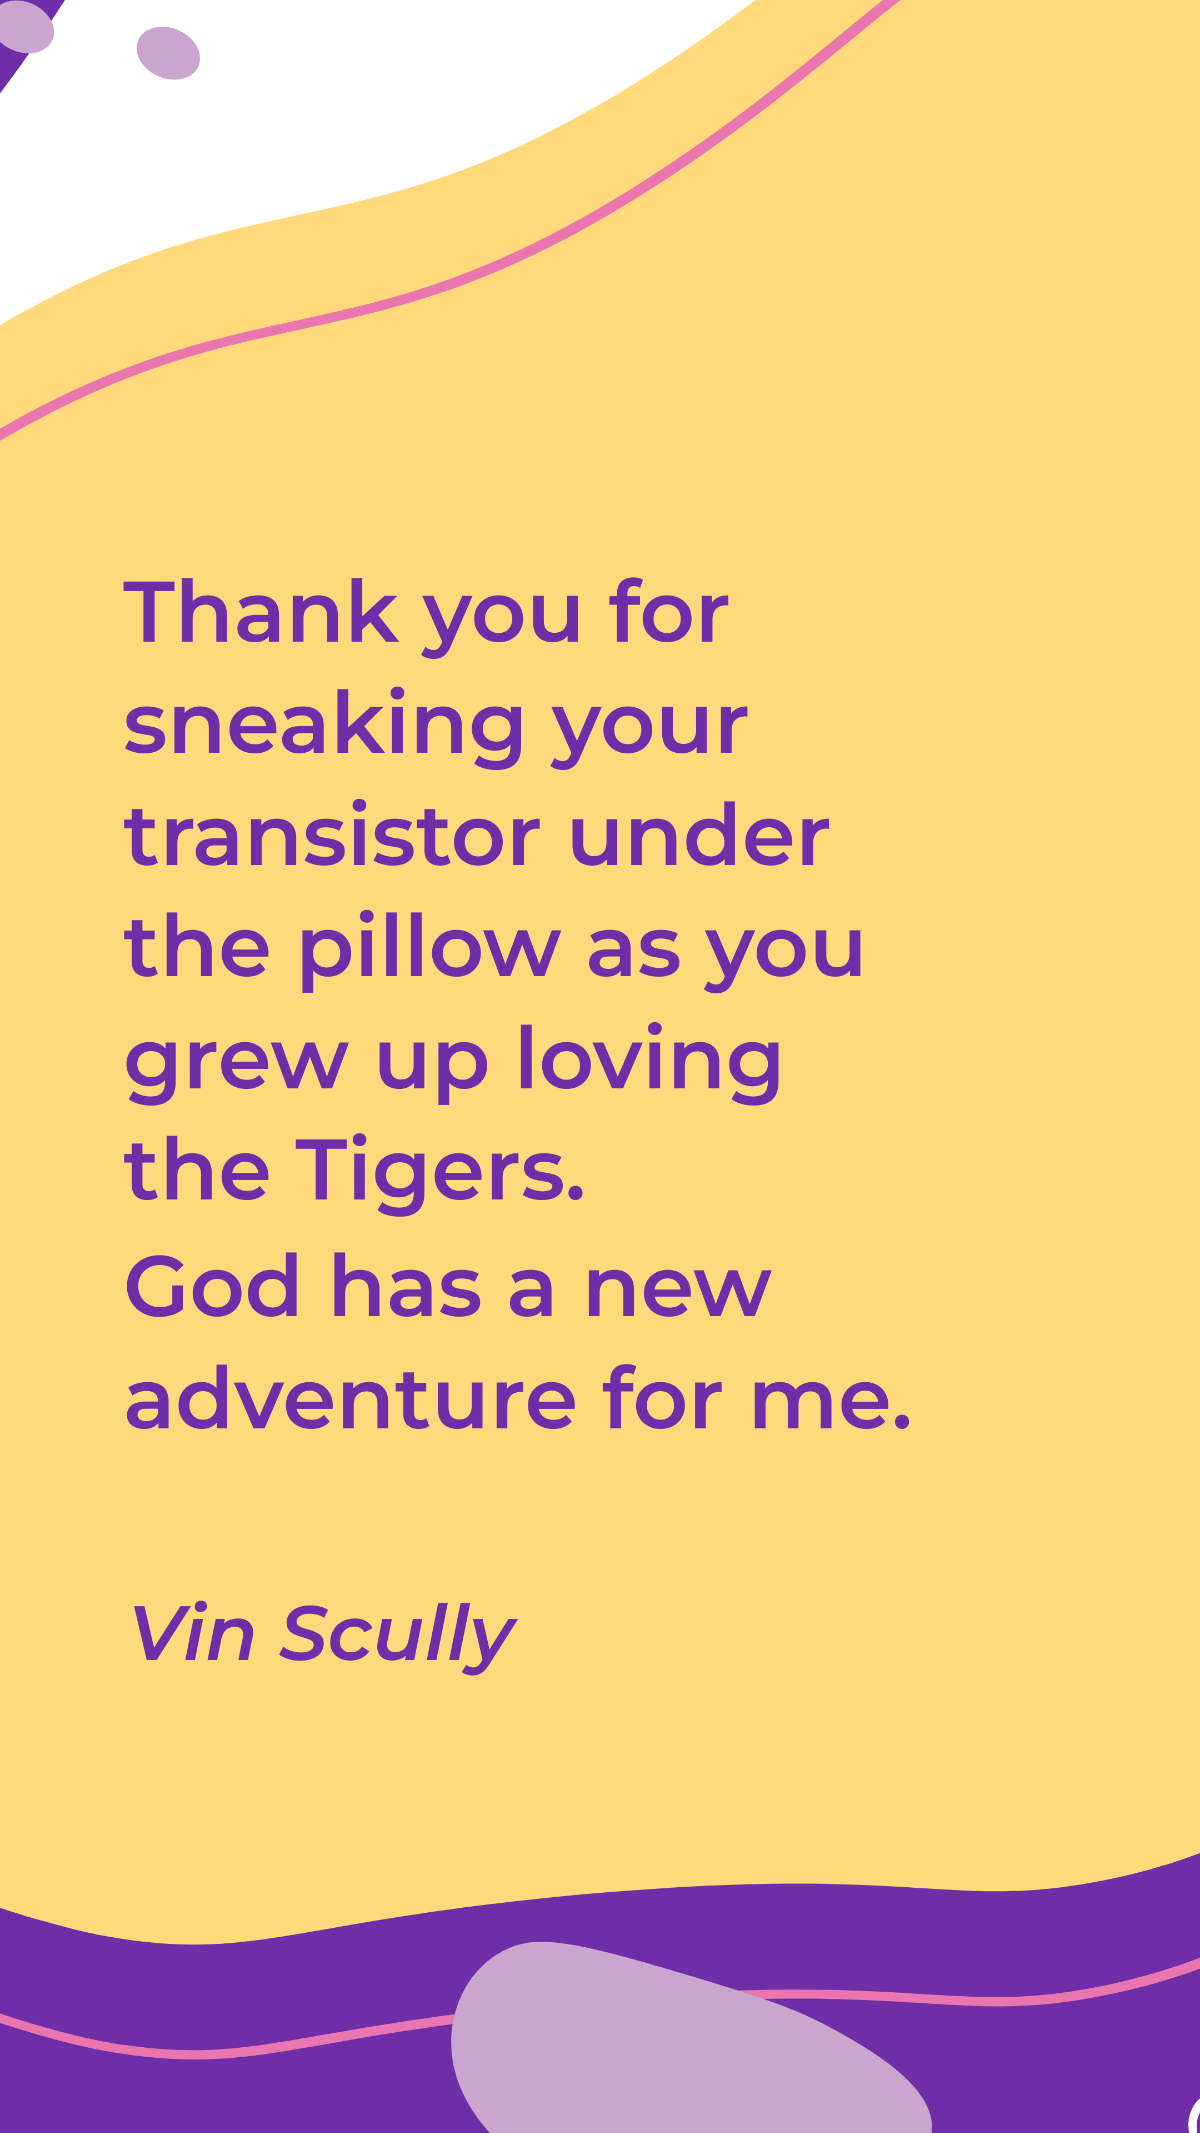 Vin Scully - Thank you for sneaking your transistor under the pillow as you grew up loving the Tigers. God has a new adventure for me. Template